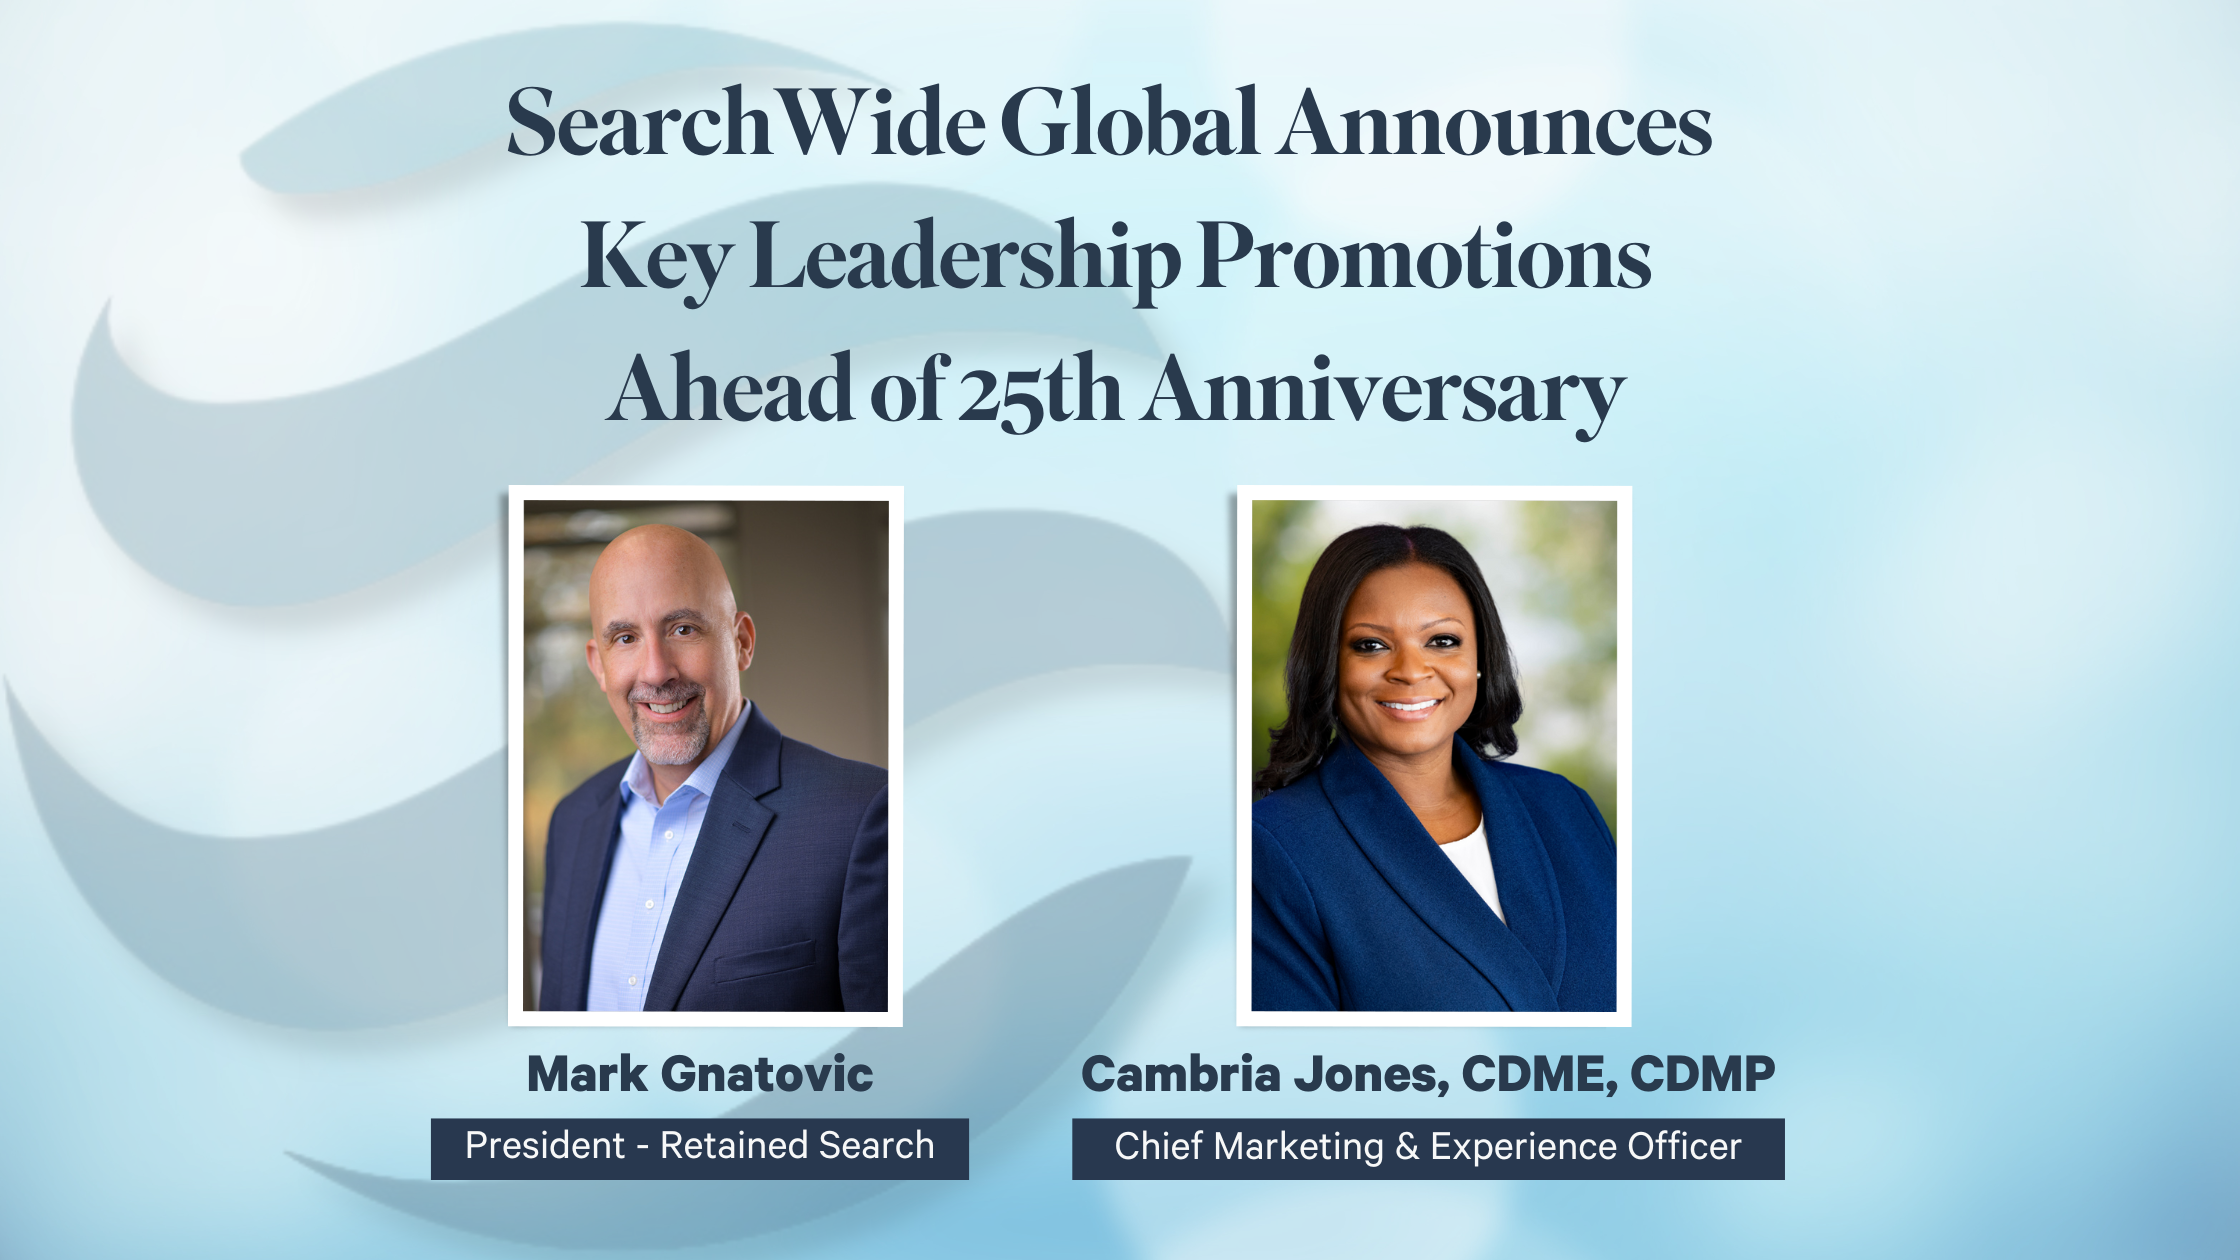 SearchWide Global Announces Key Leadership Promotions Ahead of 25th Anniversary